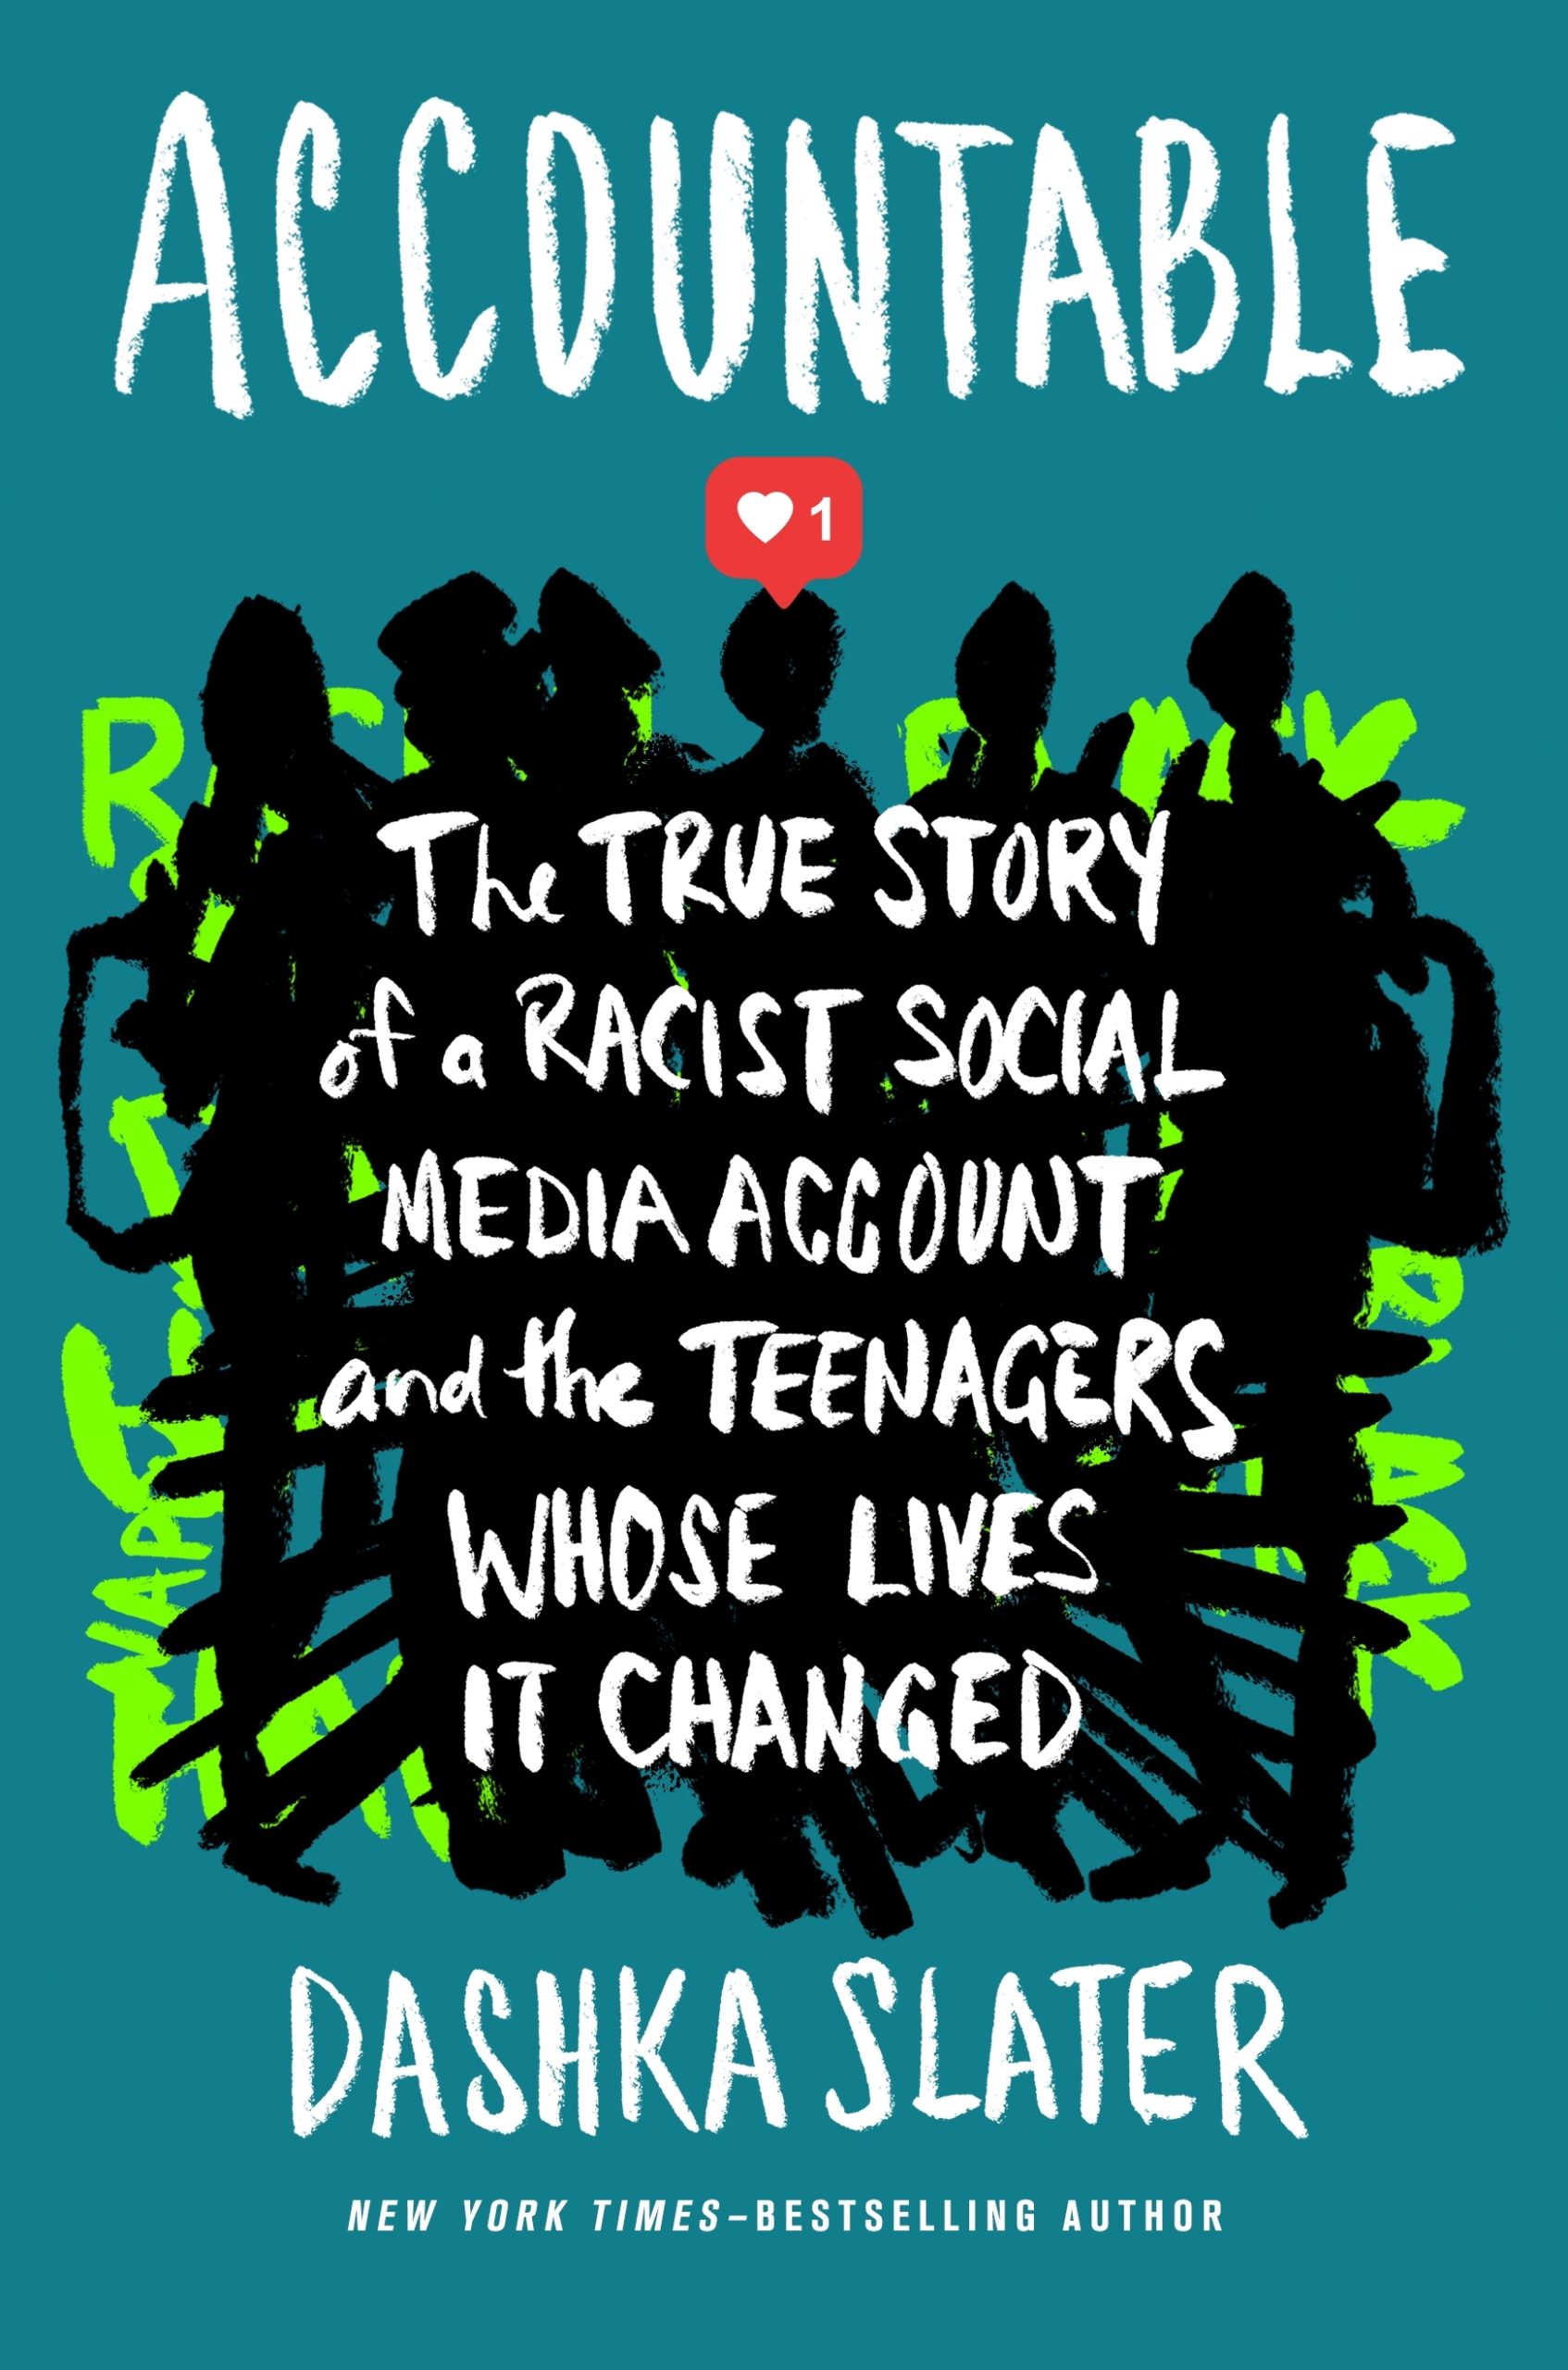 Images for Accountable: The True Story of a Racist Social Media Account and the Teenagers Whose Lives It Changed